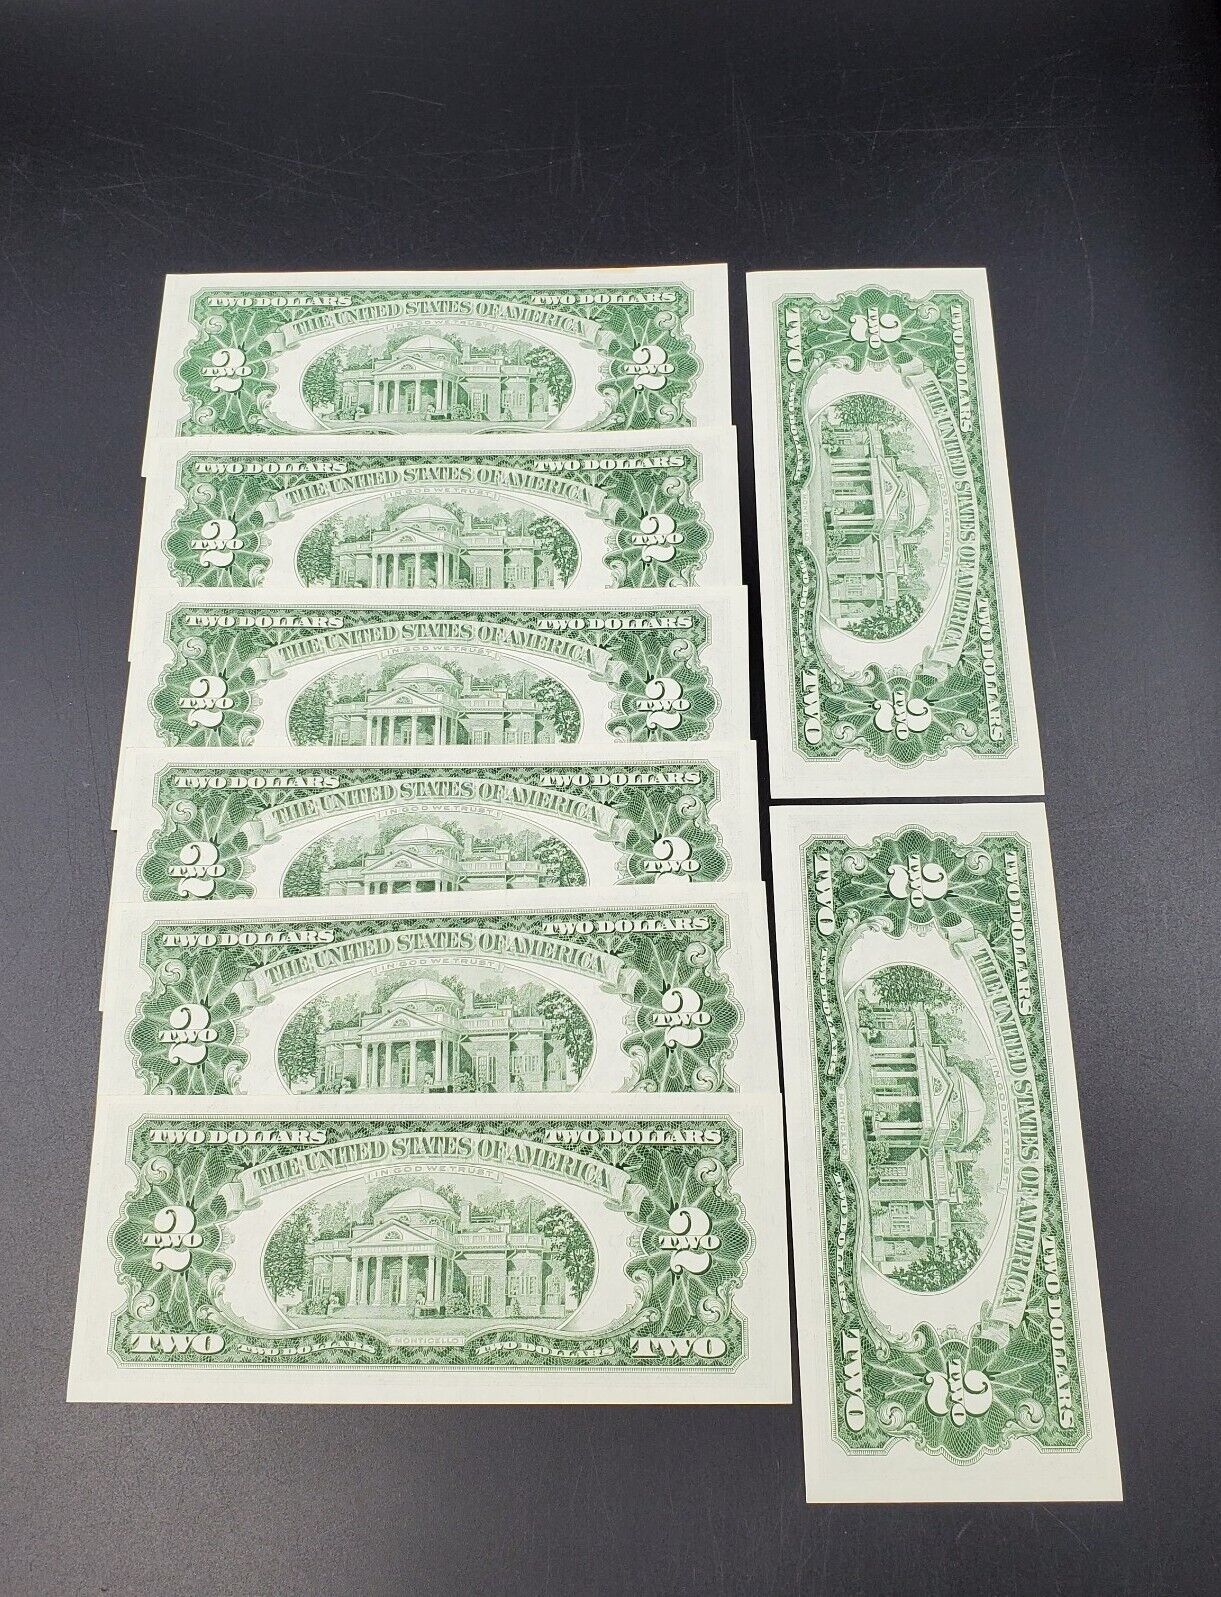 8 NOTE CONSECUTIVE SET 1963  $2 Red Seal Legal Tender Uncirculated Note Bills